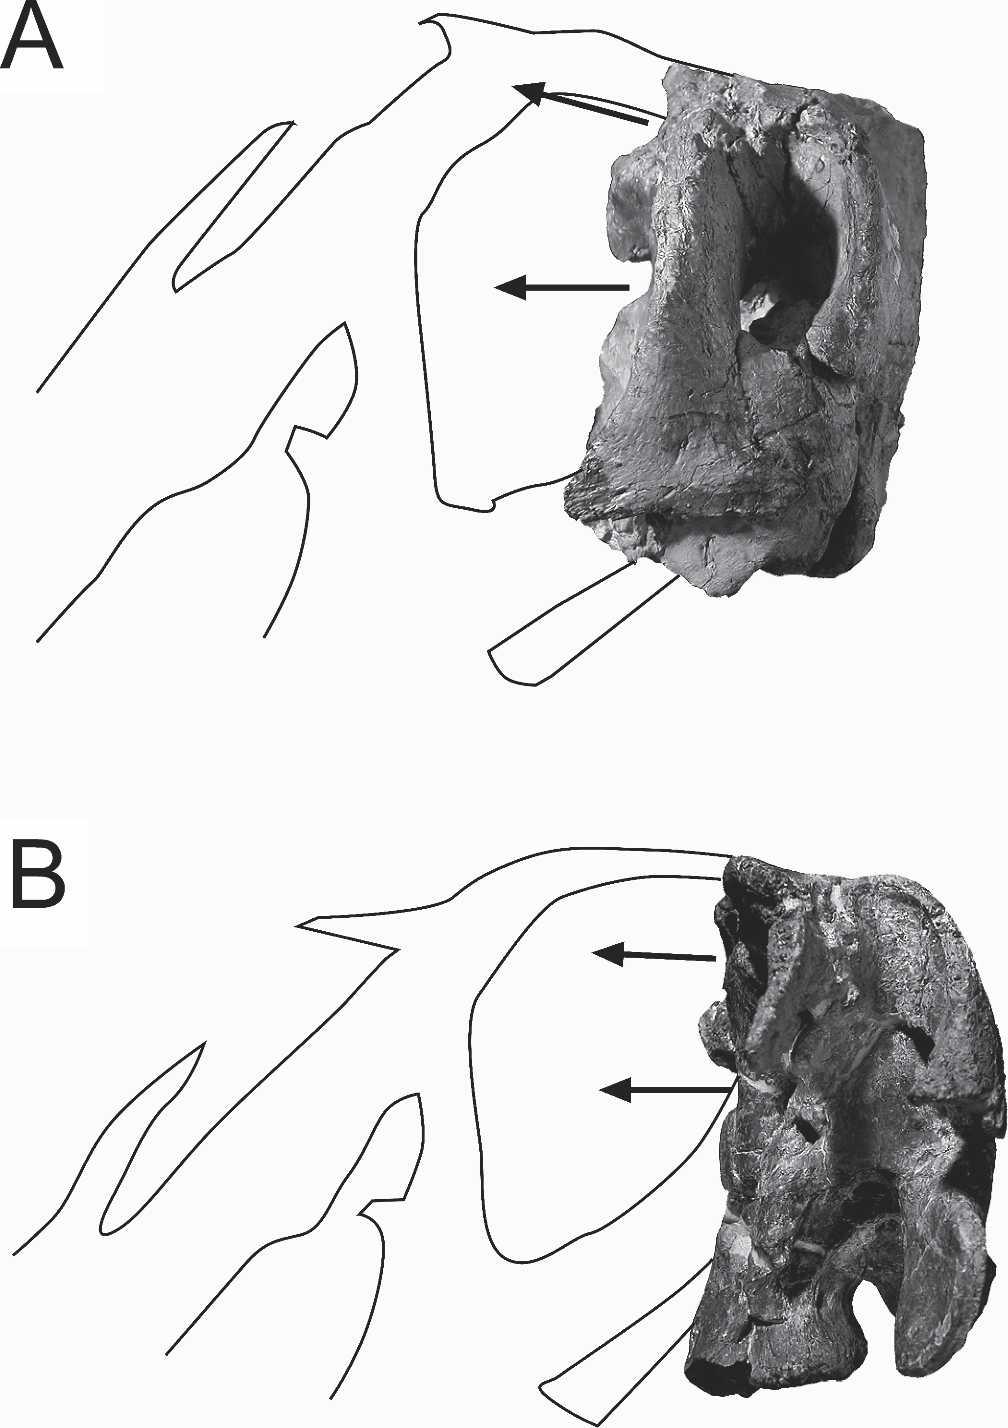 100 JOURNAL OF VERTEBRATE PALEONTOLOGY, VOL. 26, NO. 1, 2006 transverse crest of bone. The tubercles themselves are craniocaudally flat rather than rugose, hemispheroidal knobs as in ANS 21122.